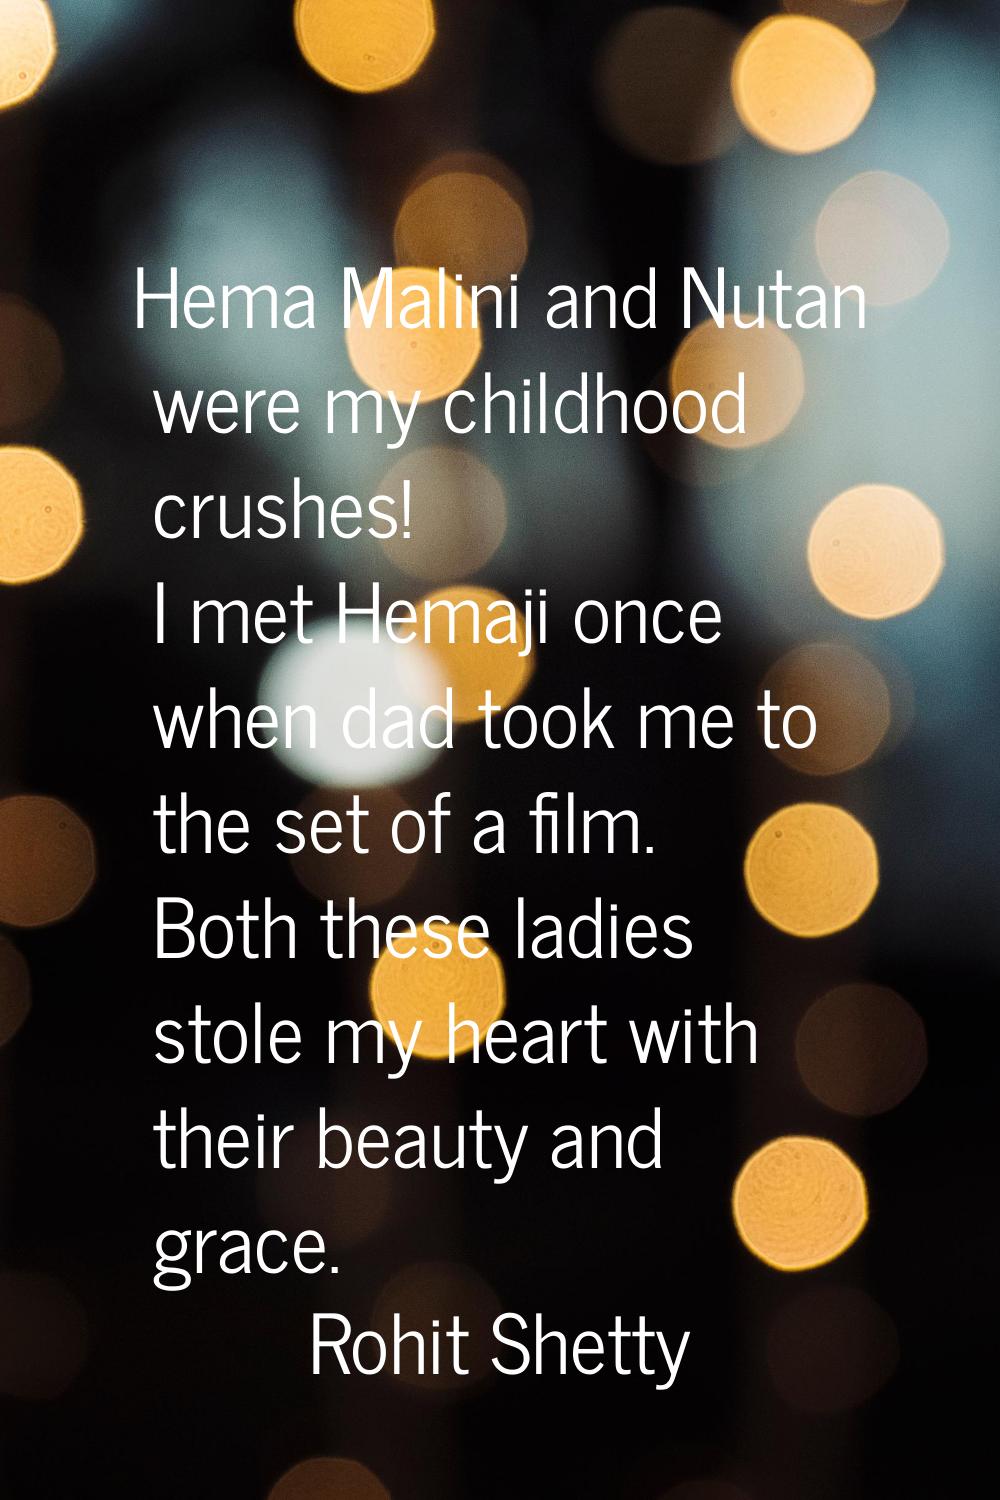 Hema Malini and Nutan were my childhood crushes! I met Hemaji once when dad took me to the set of a